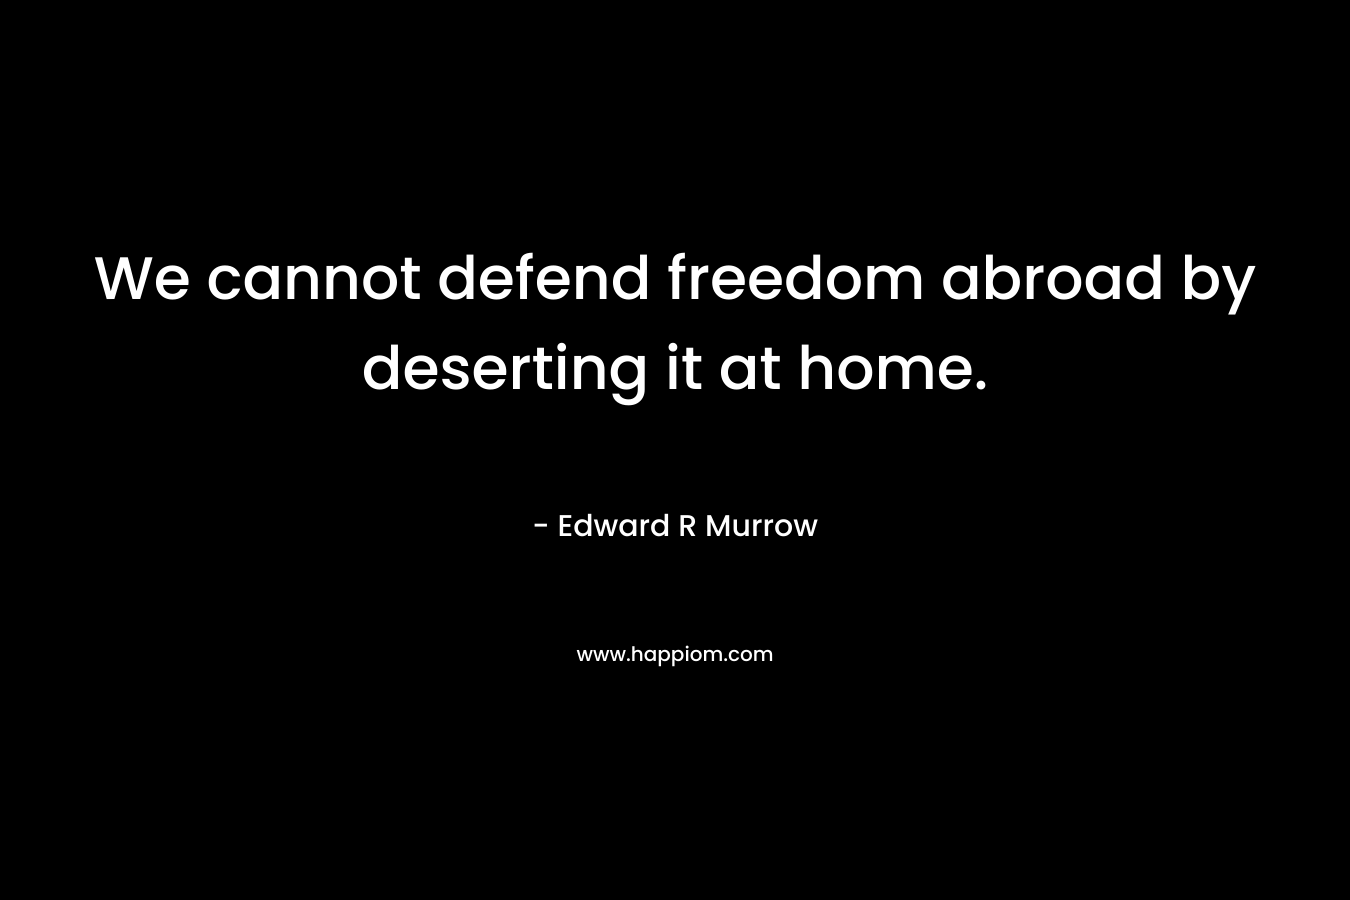 We cannot defend freedom abroad by deserting it at home. – Edward R Murrow